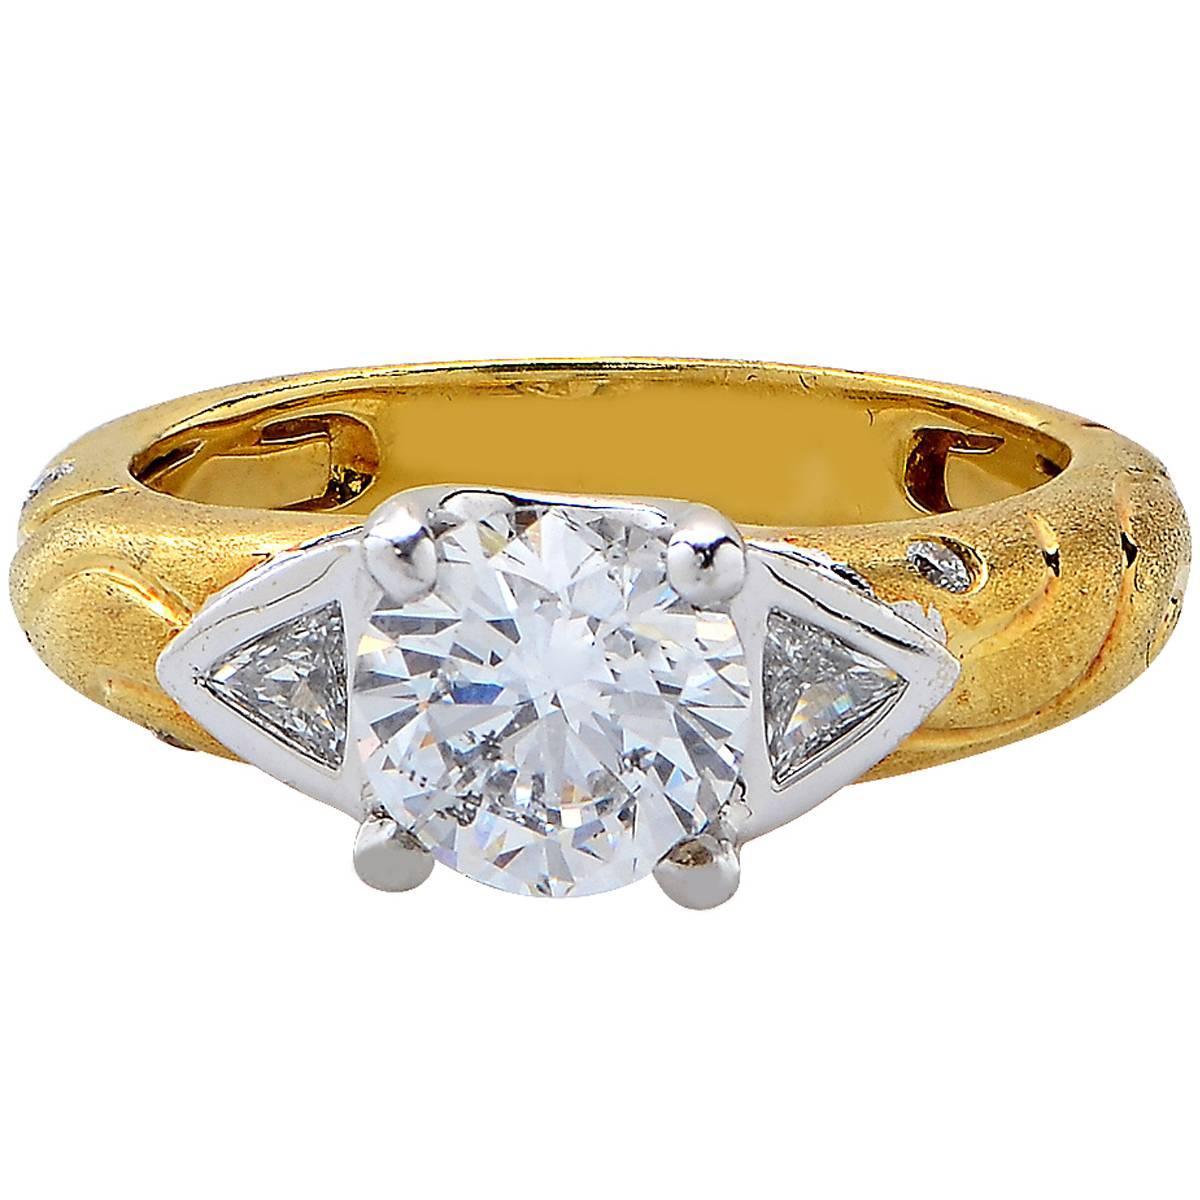 18 yellow gold ring featuring a GIA graded 1.50ct D color I1 clarity round brilliant cut diamond flanked by two trilliant cut diamonds and 12 round brilliant cut diamonds weighing .36cts.

The ring is a size 6 and can be sized up or down.
It is